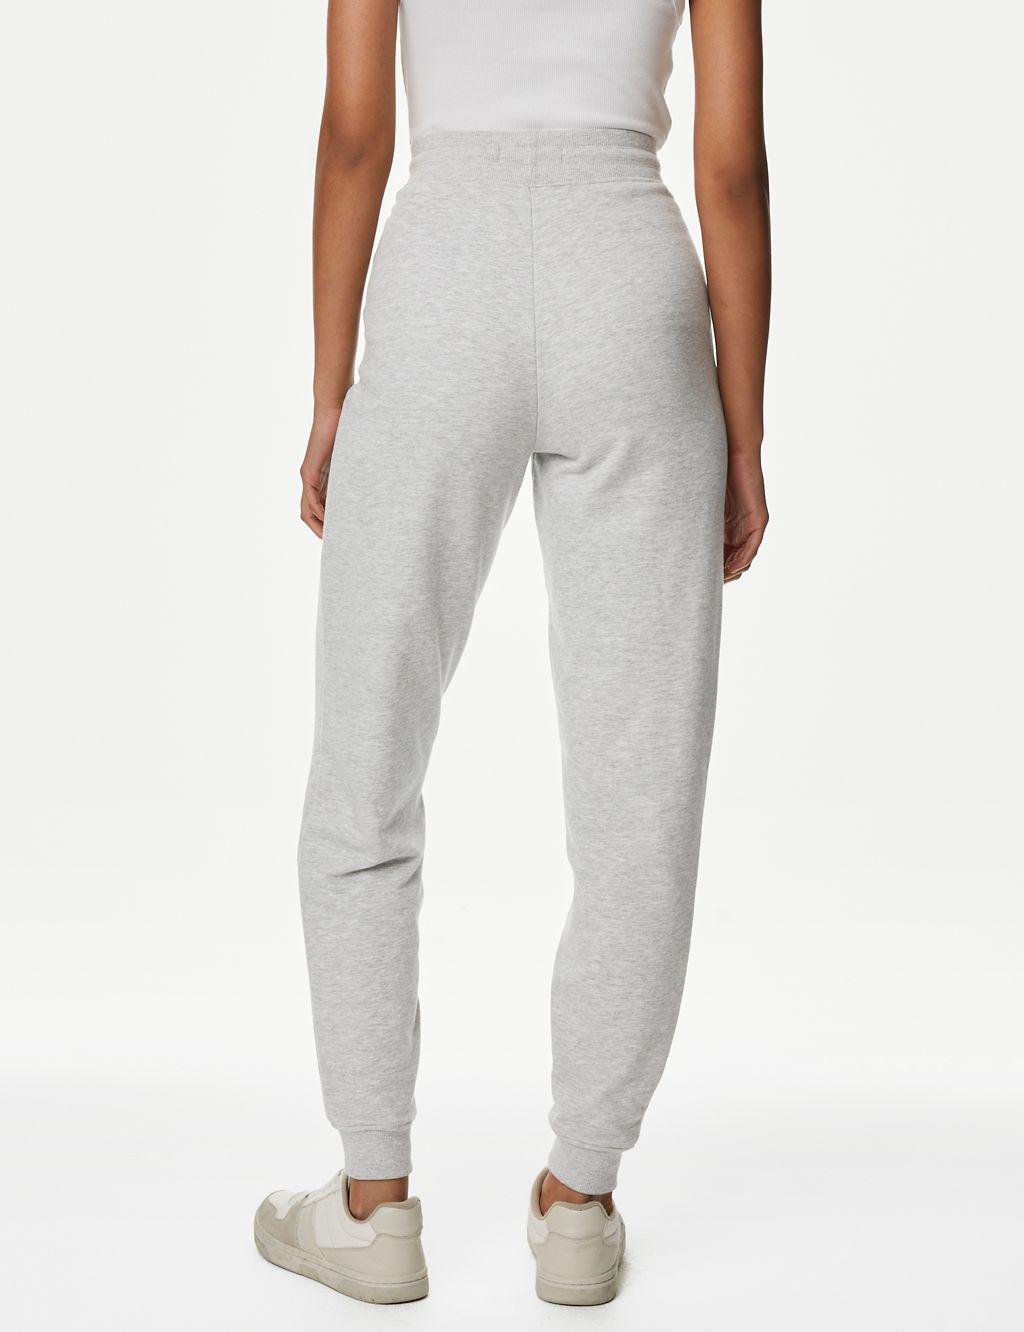 The Cotton Rich Cuffed Joggers 5 of 7